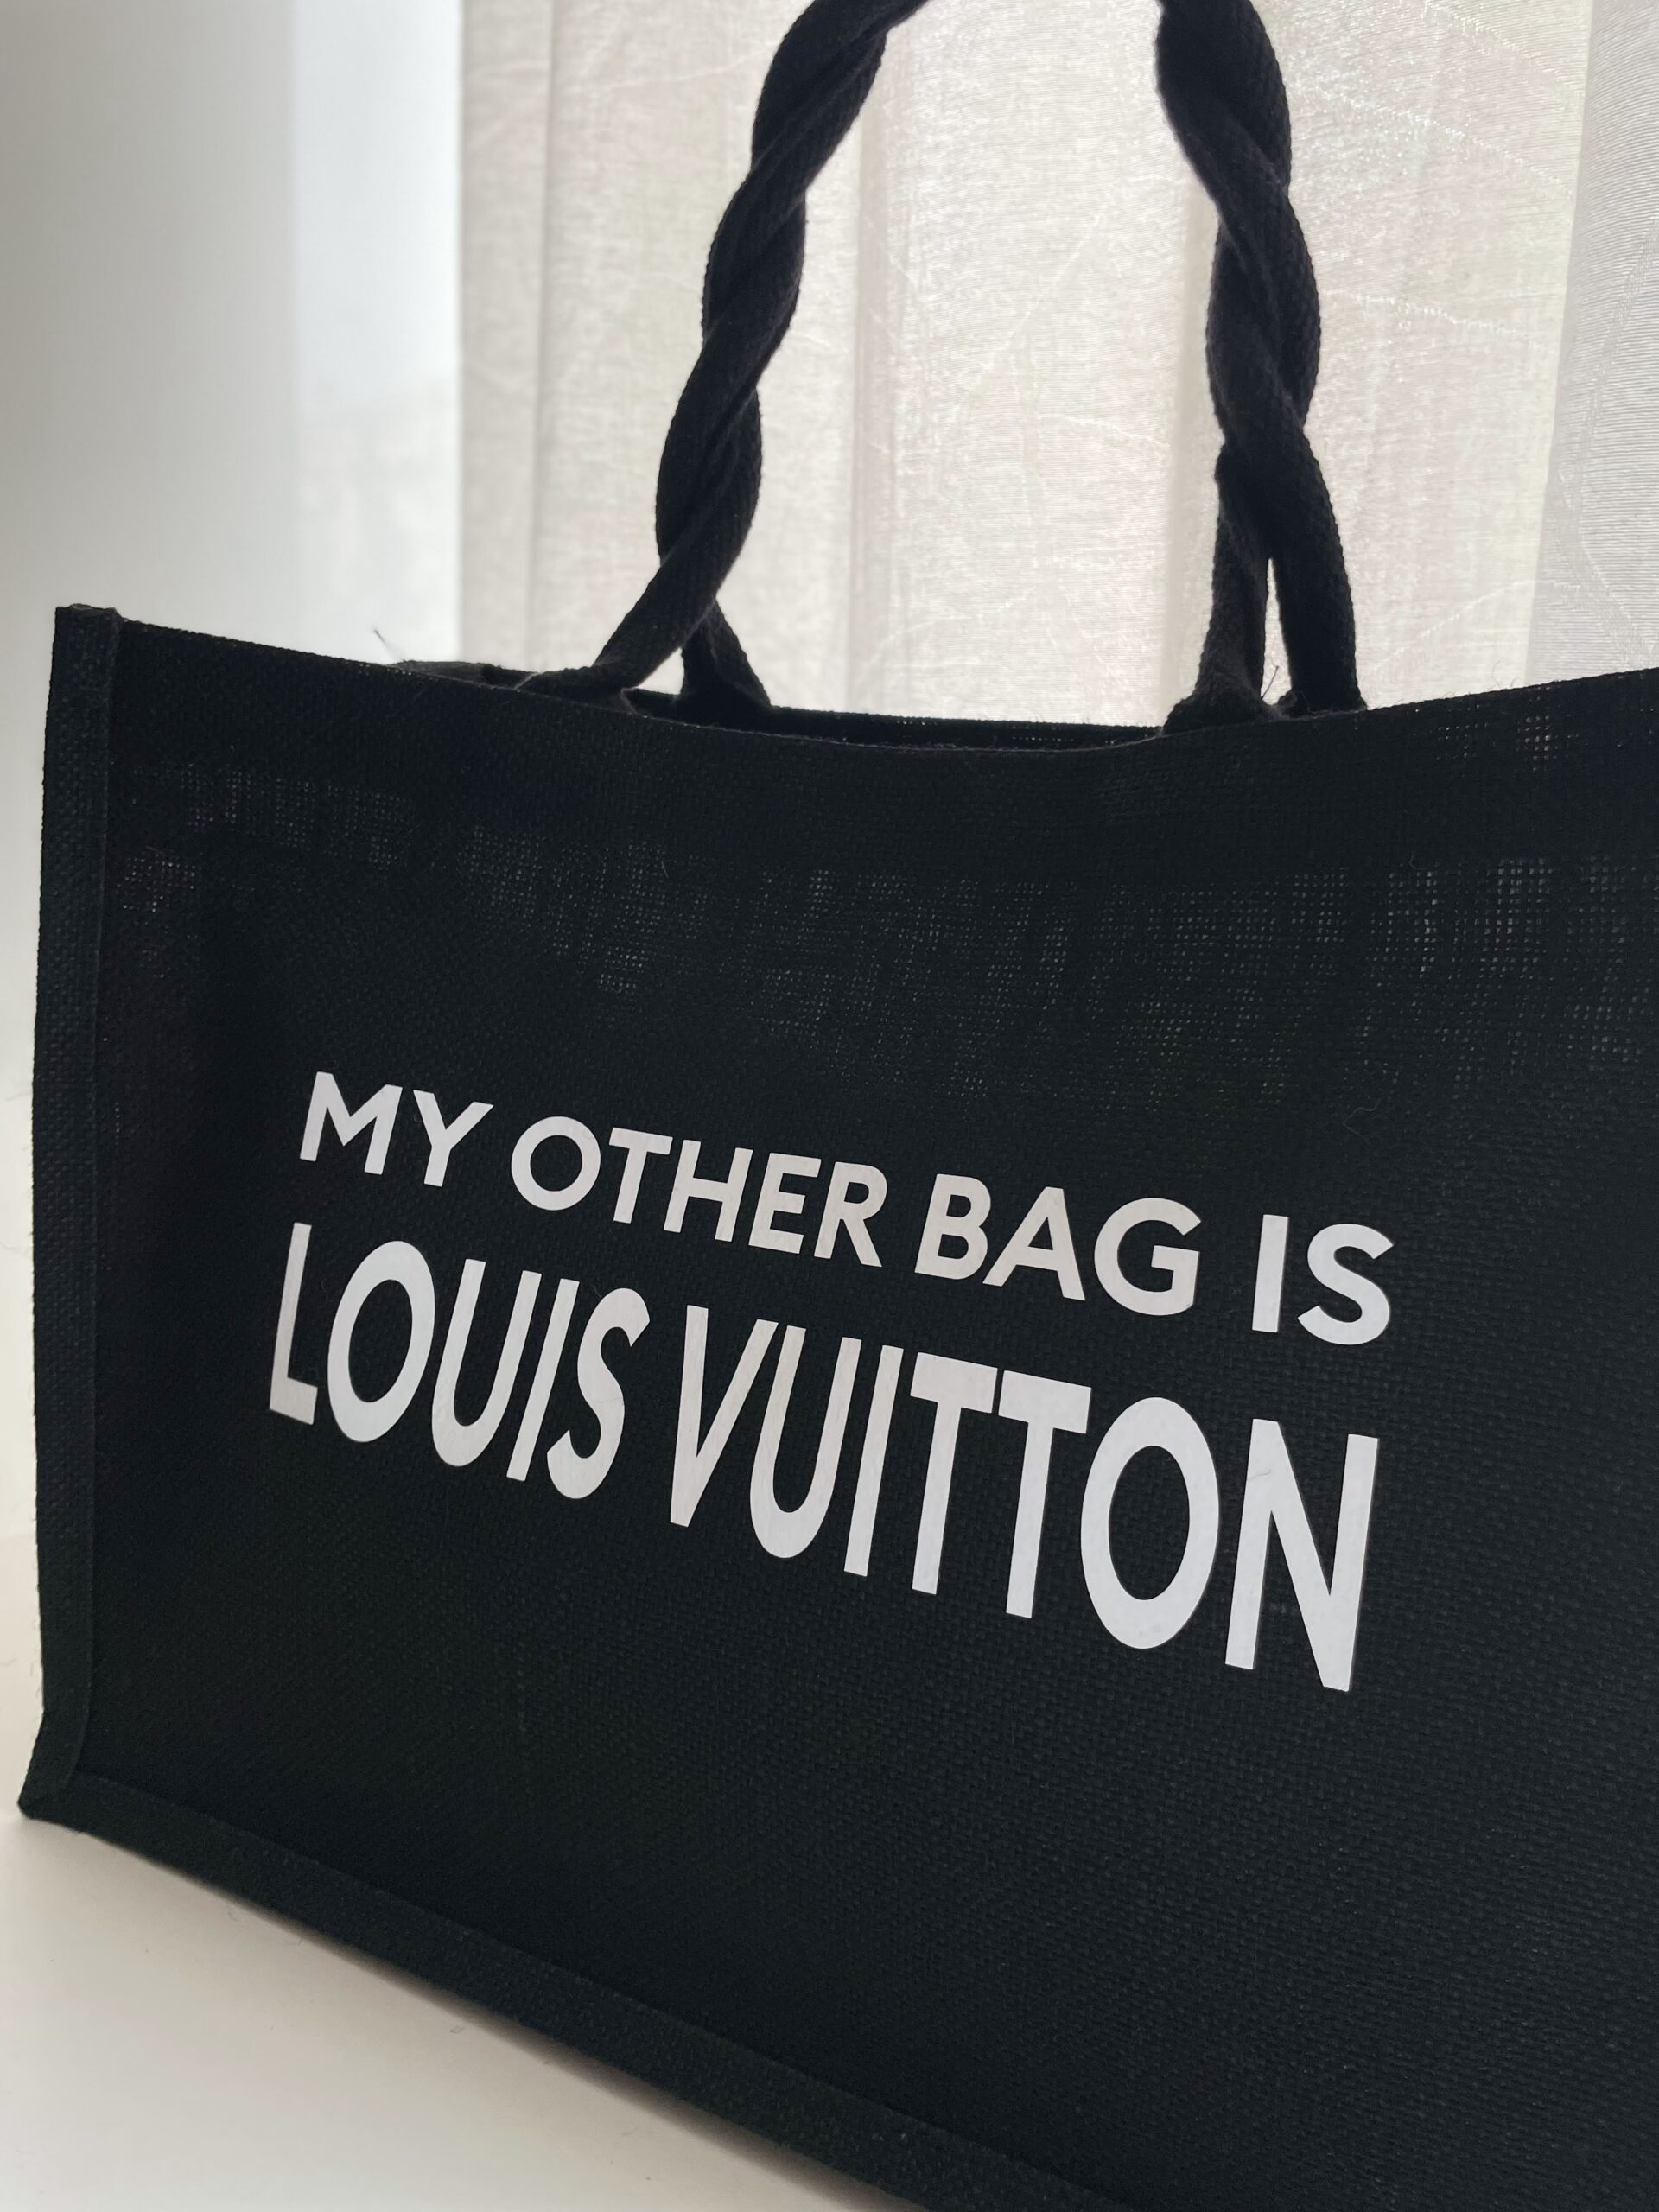 my other bag is a louis vuitton